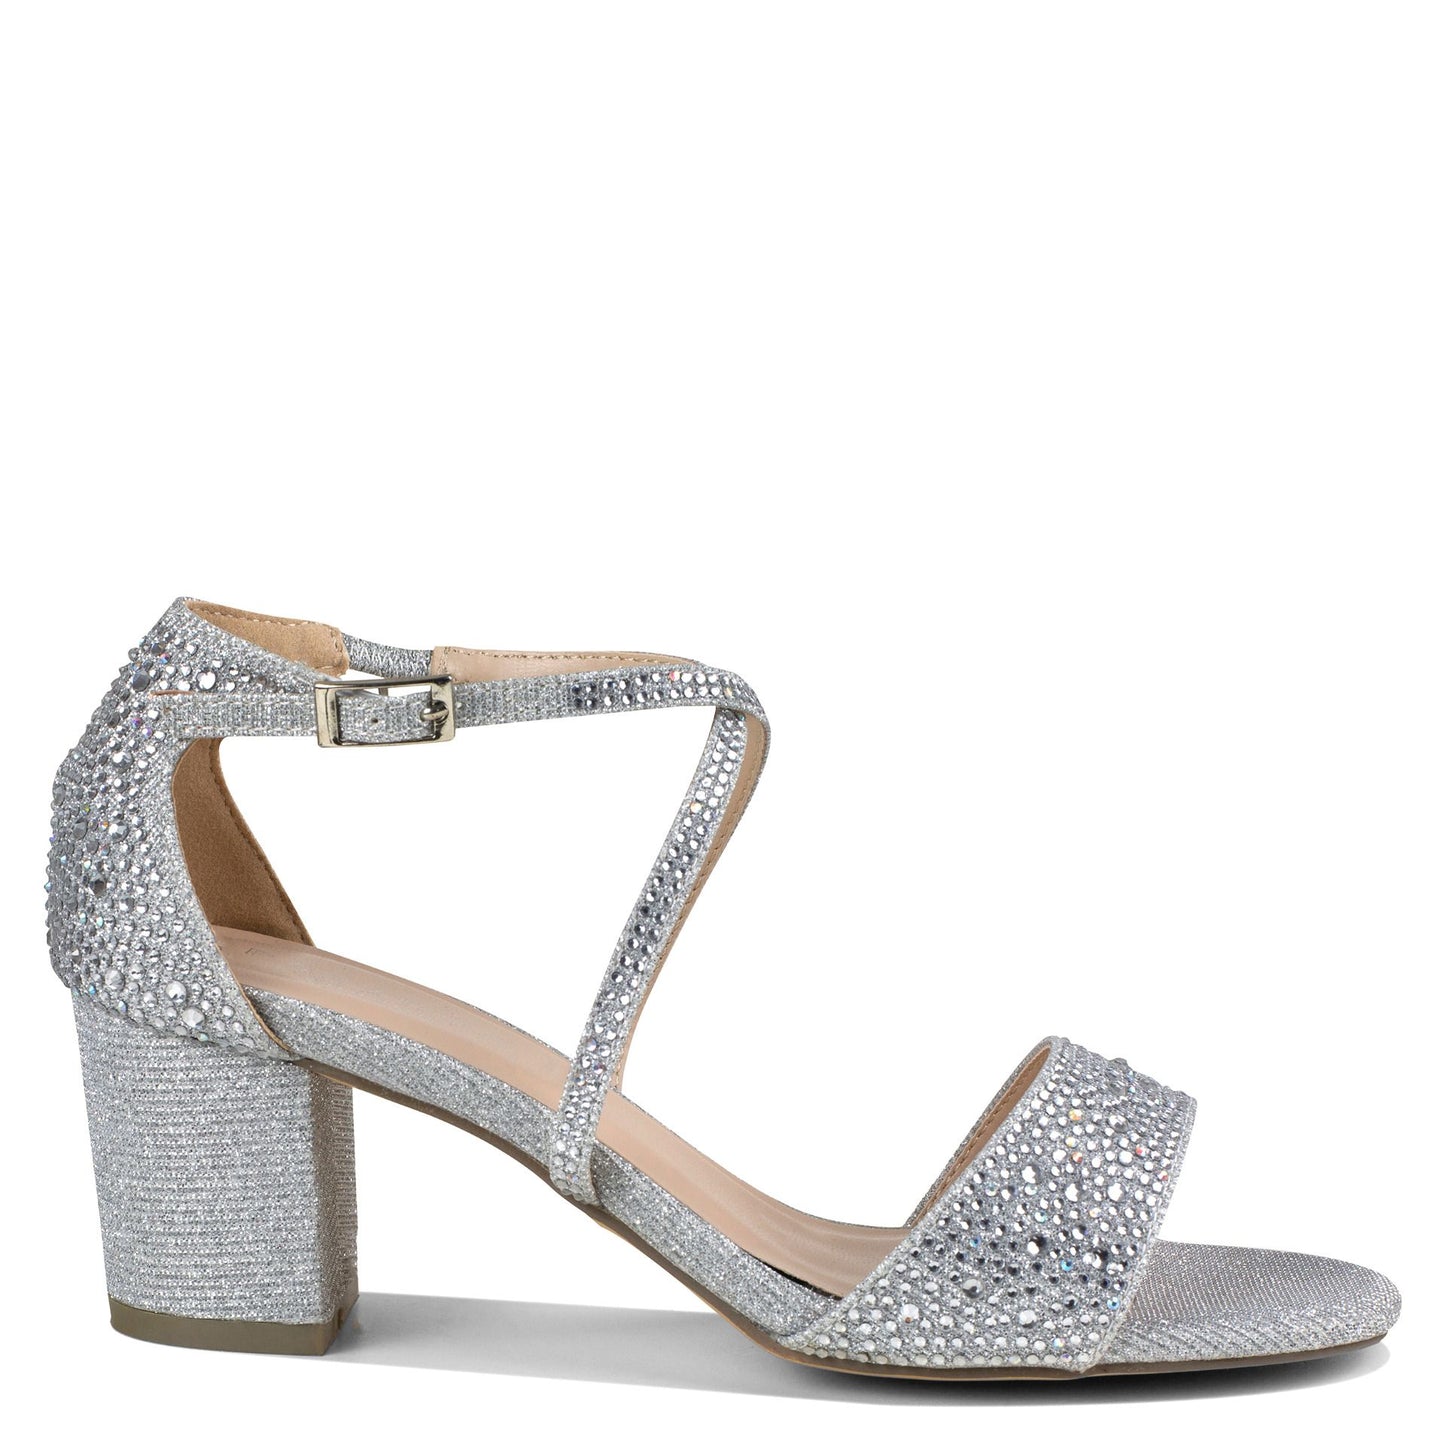 Side view of Metallic silver shoe with 2" block heel and criss cross straps